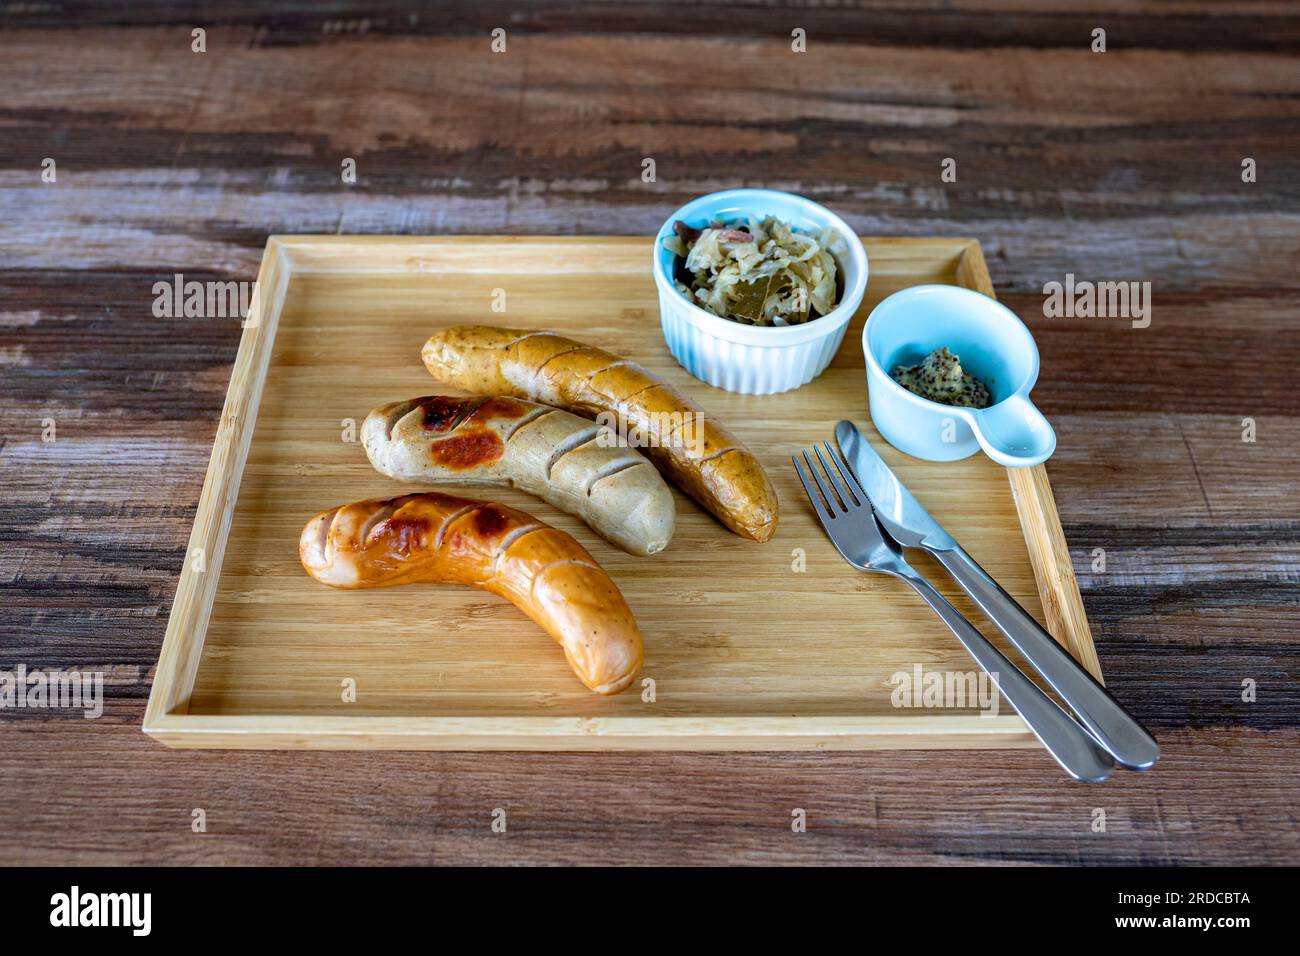 Photos of Grilled German Sausages with sauerkraut and dijon mustard in small bowls with knife and fork Together in a rectangular wooden tray, on a woo Stock Photo